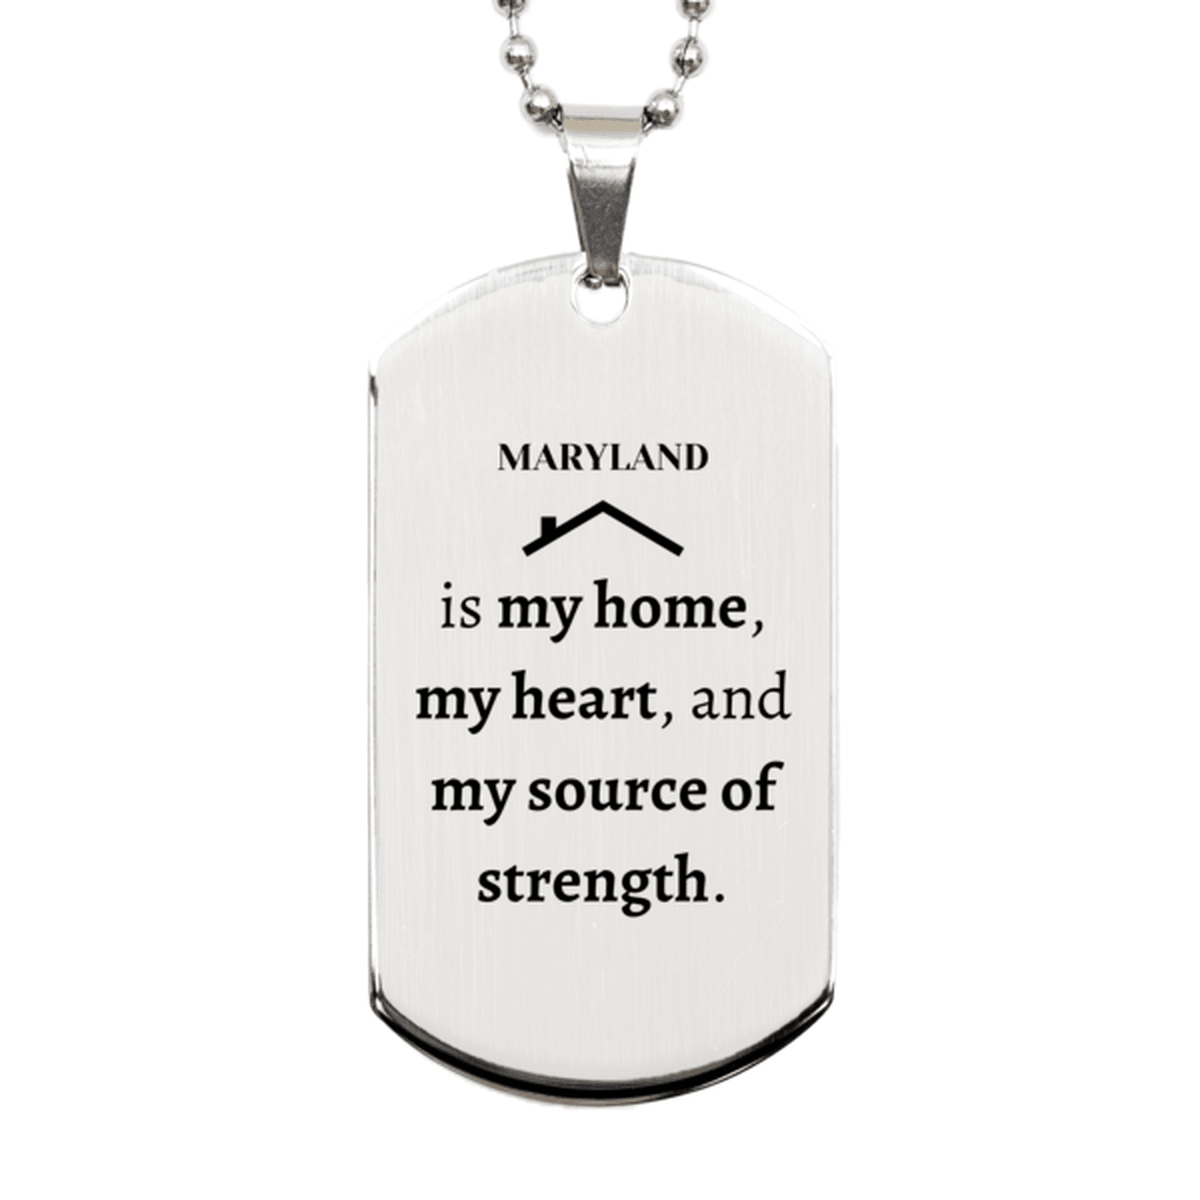 Maryland is my home Gifts, Lovely Maryland Birthday Christmas Silver Dog Tag For People from Maryland, Men, Women, Friends - Mallard Moon Gift Shop